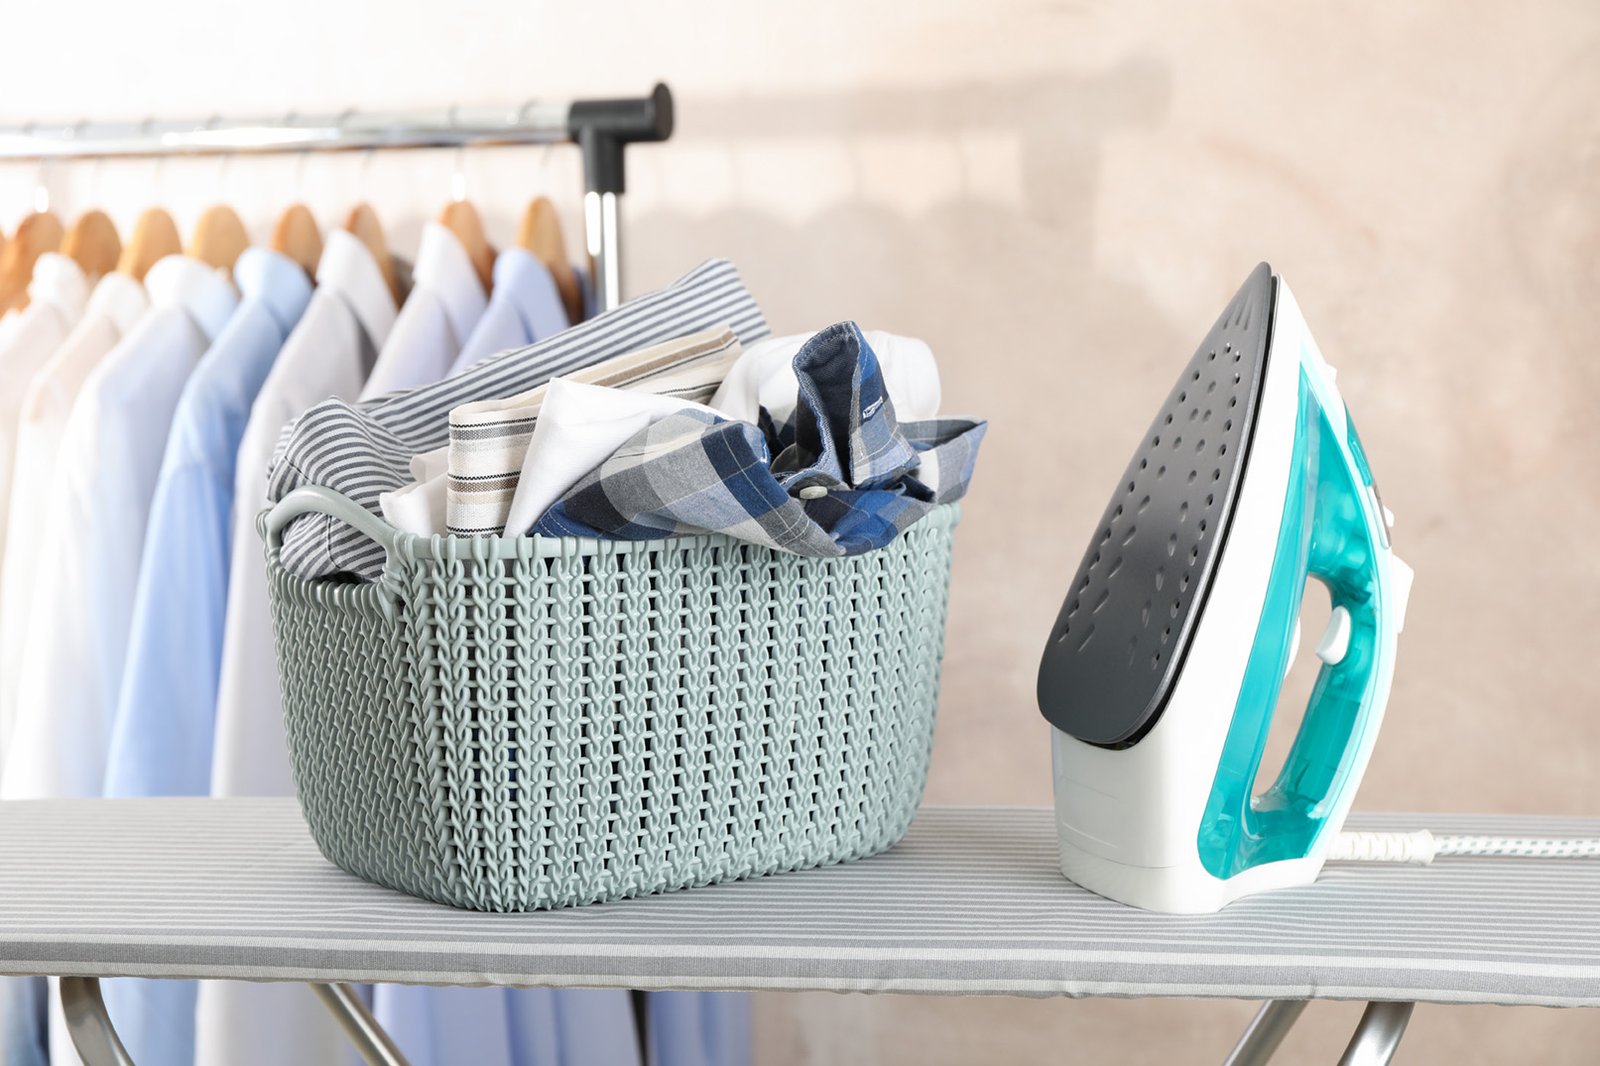 rental housewares package that includes and iron and ironing board and laundry basket for rent